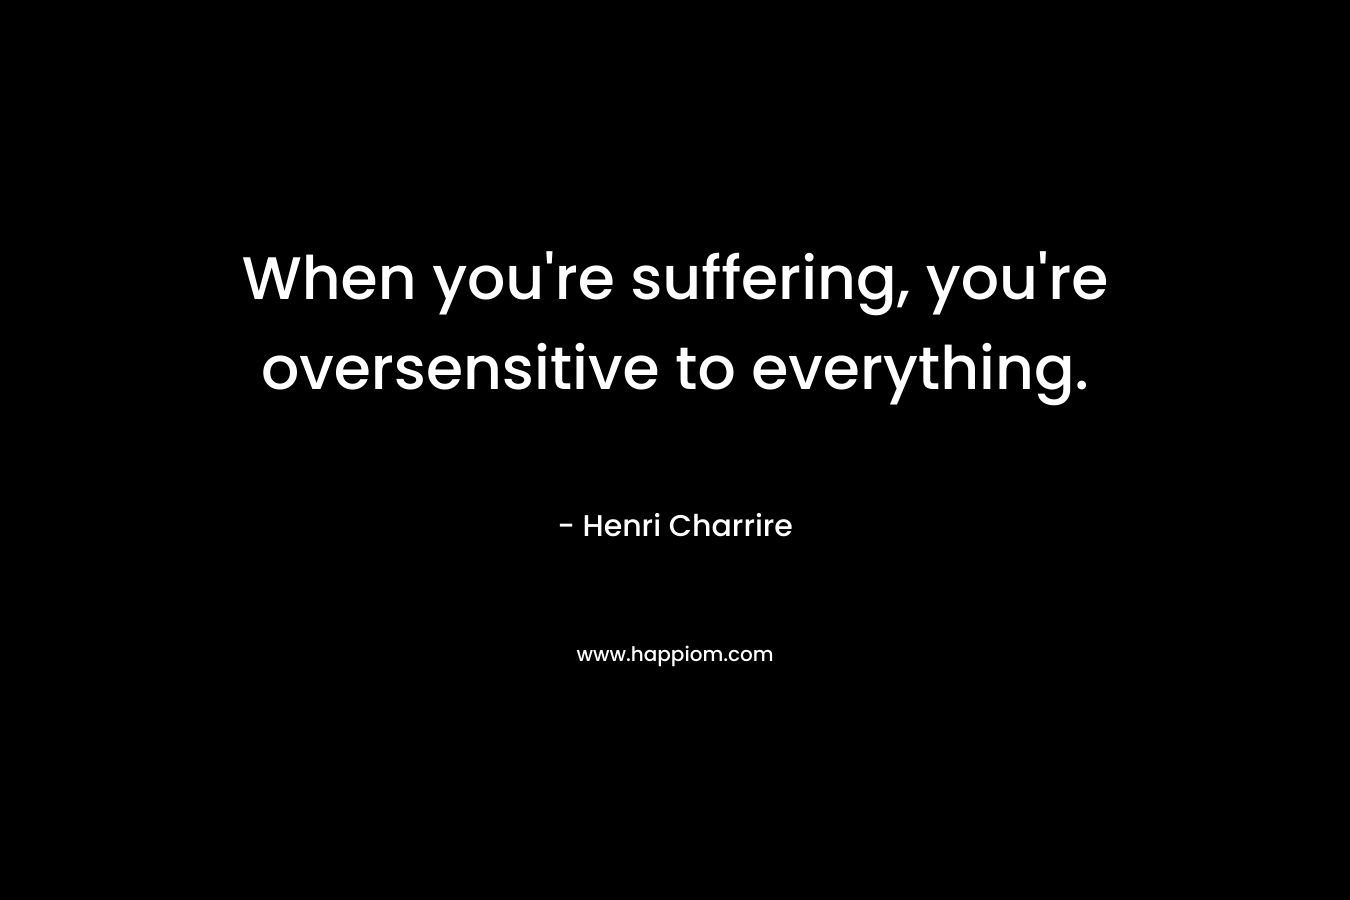 When you're suffering, you're oversensitive to everything.